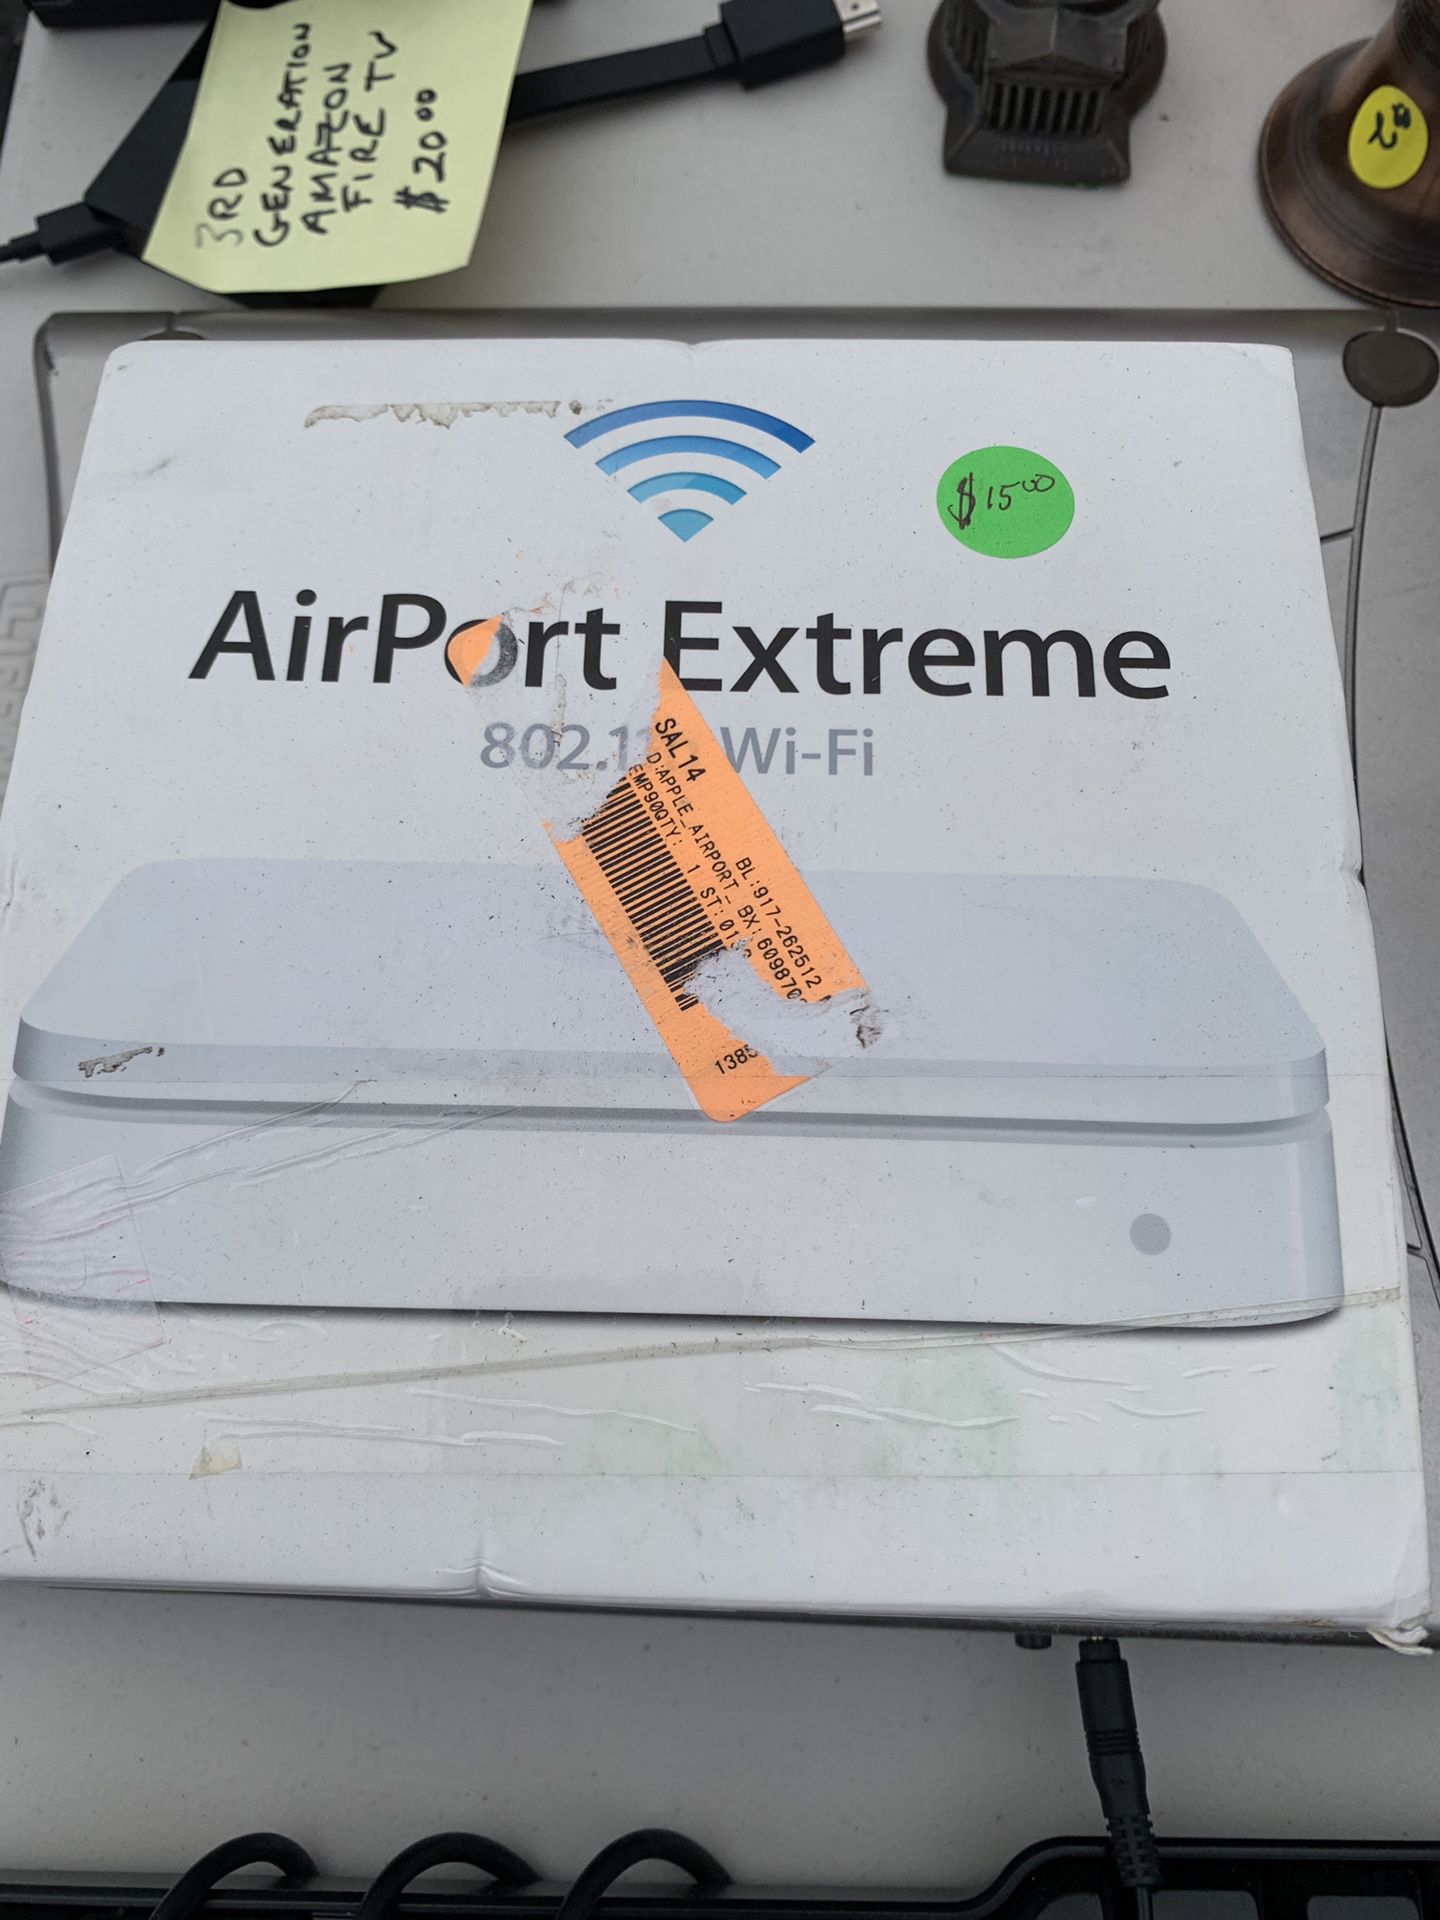 Apple AirPort Extreme